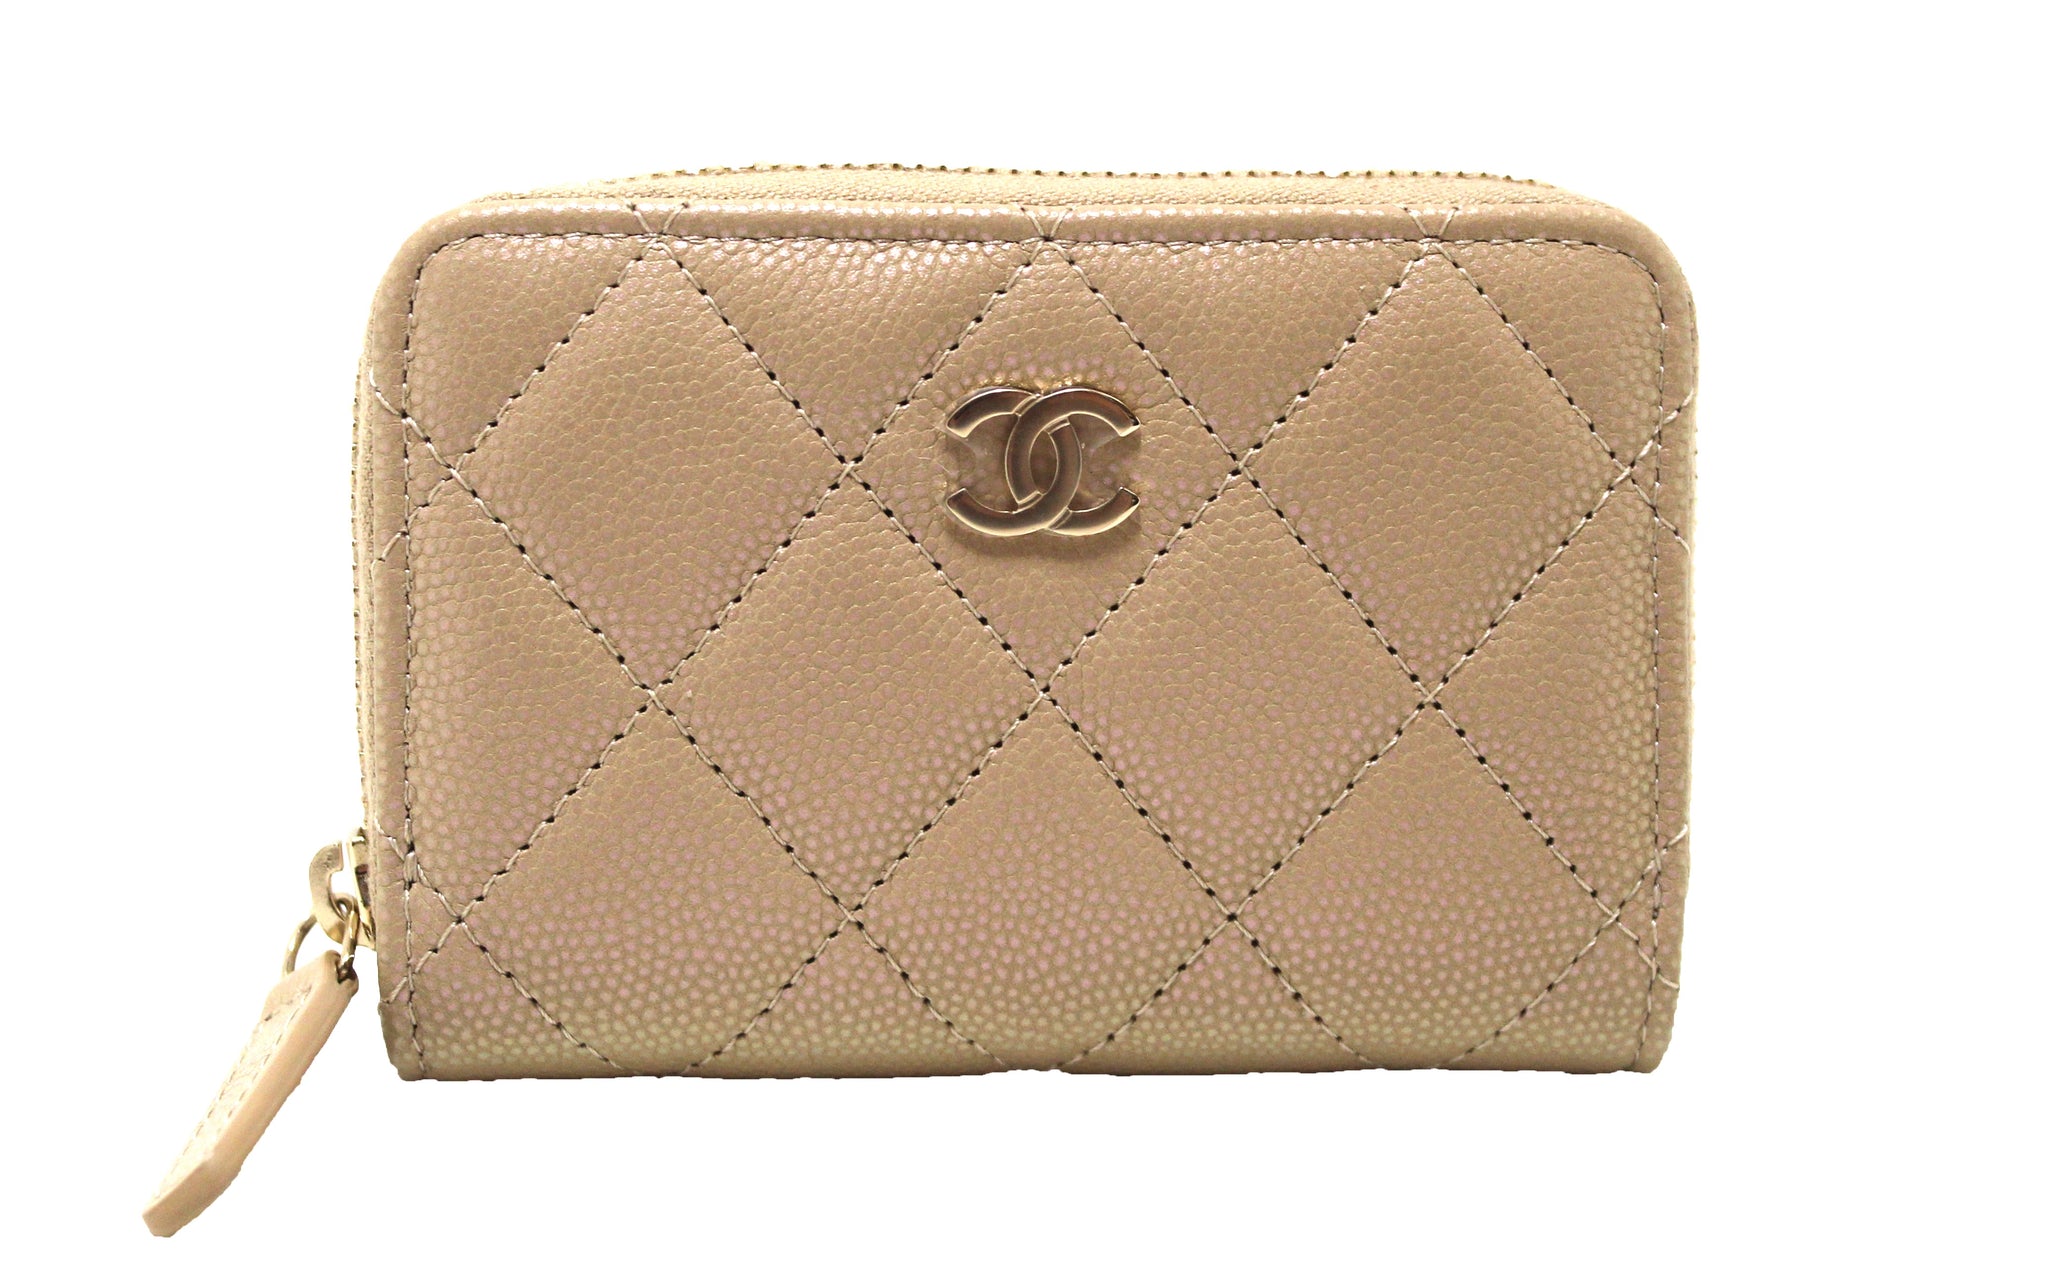 Authentic NEW Chanel Iridescent Dark Beige Quilted Caviar Leather